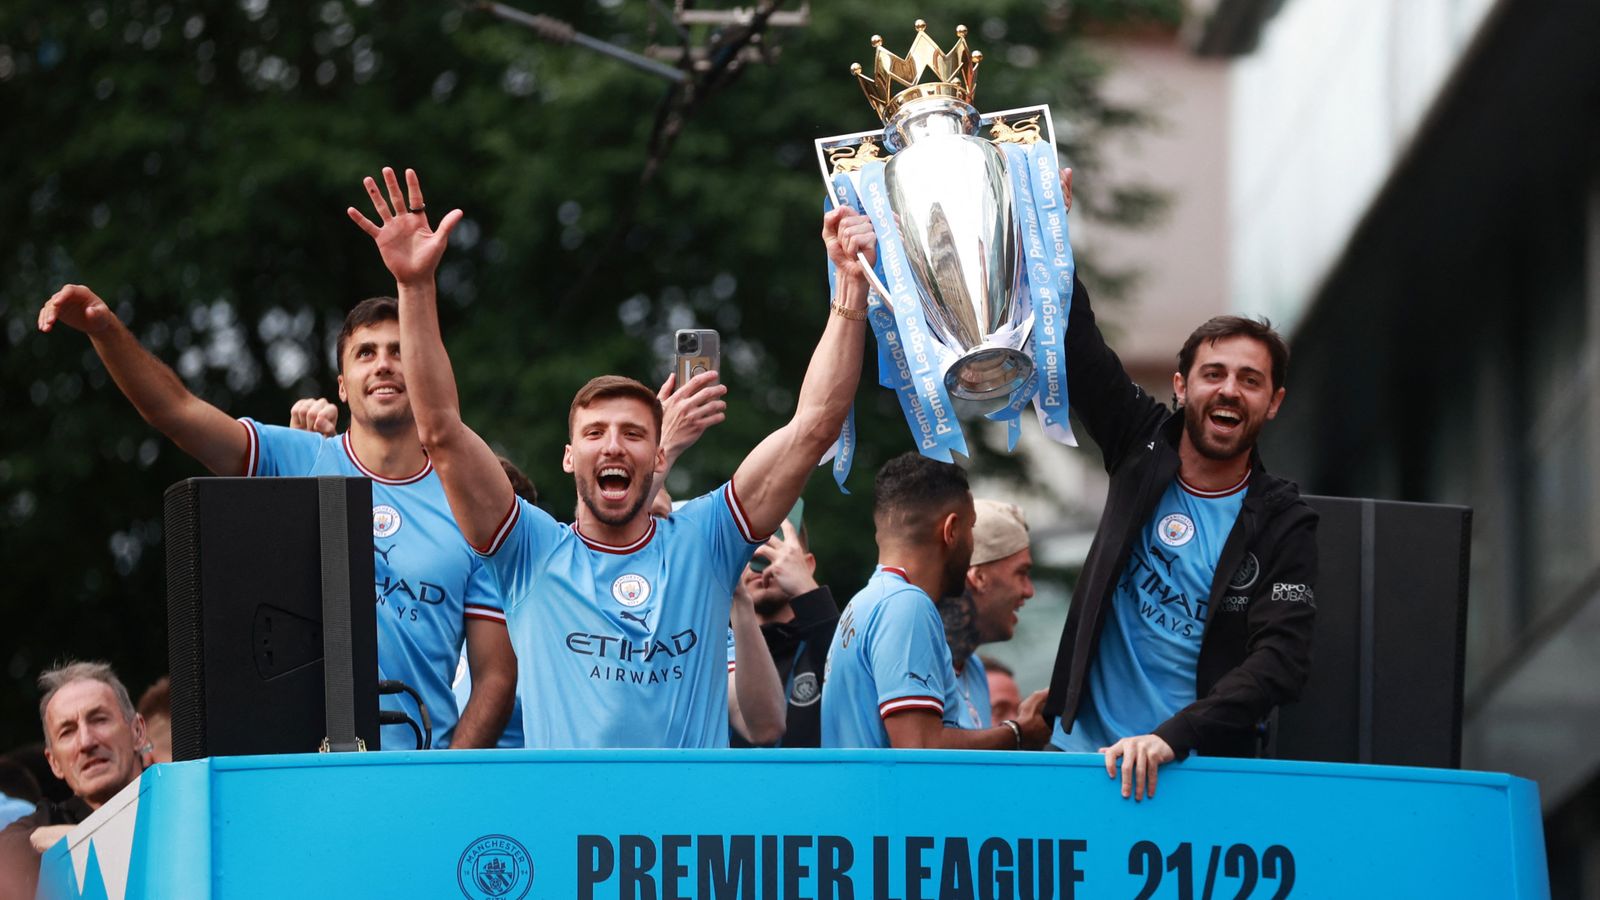 Premier League clubs dominate football's top money makers - but which team earned the most?